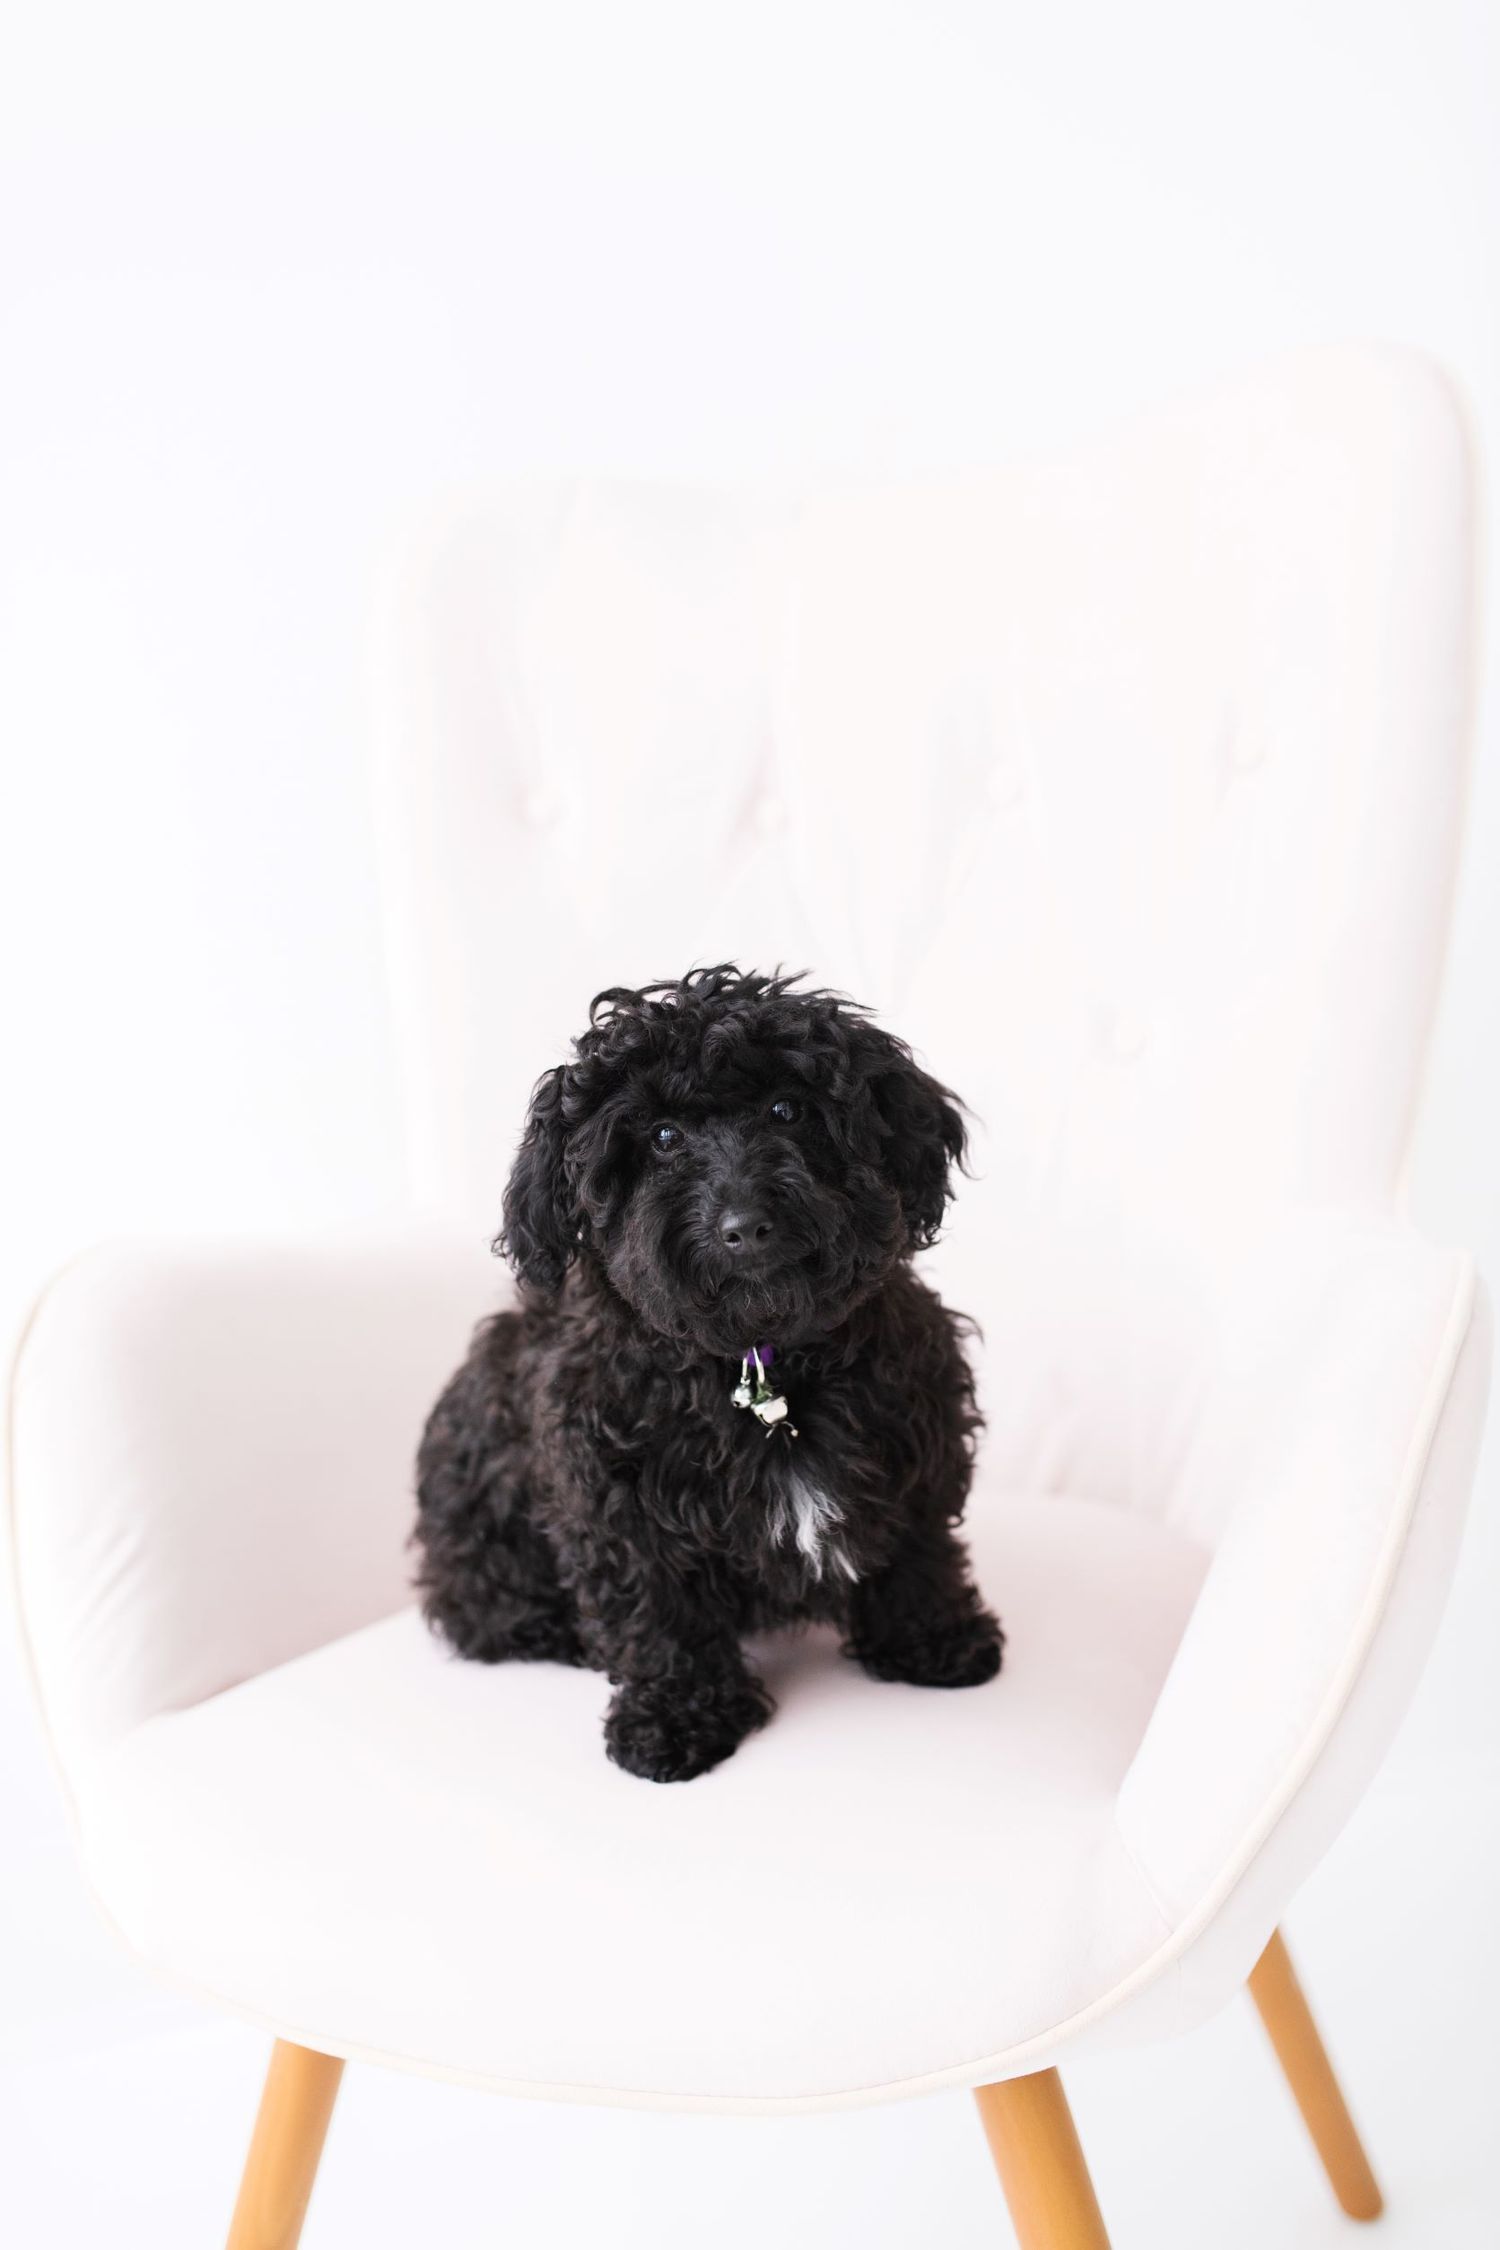 Gallery Photo of Rumi, therapy pup in training. 